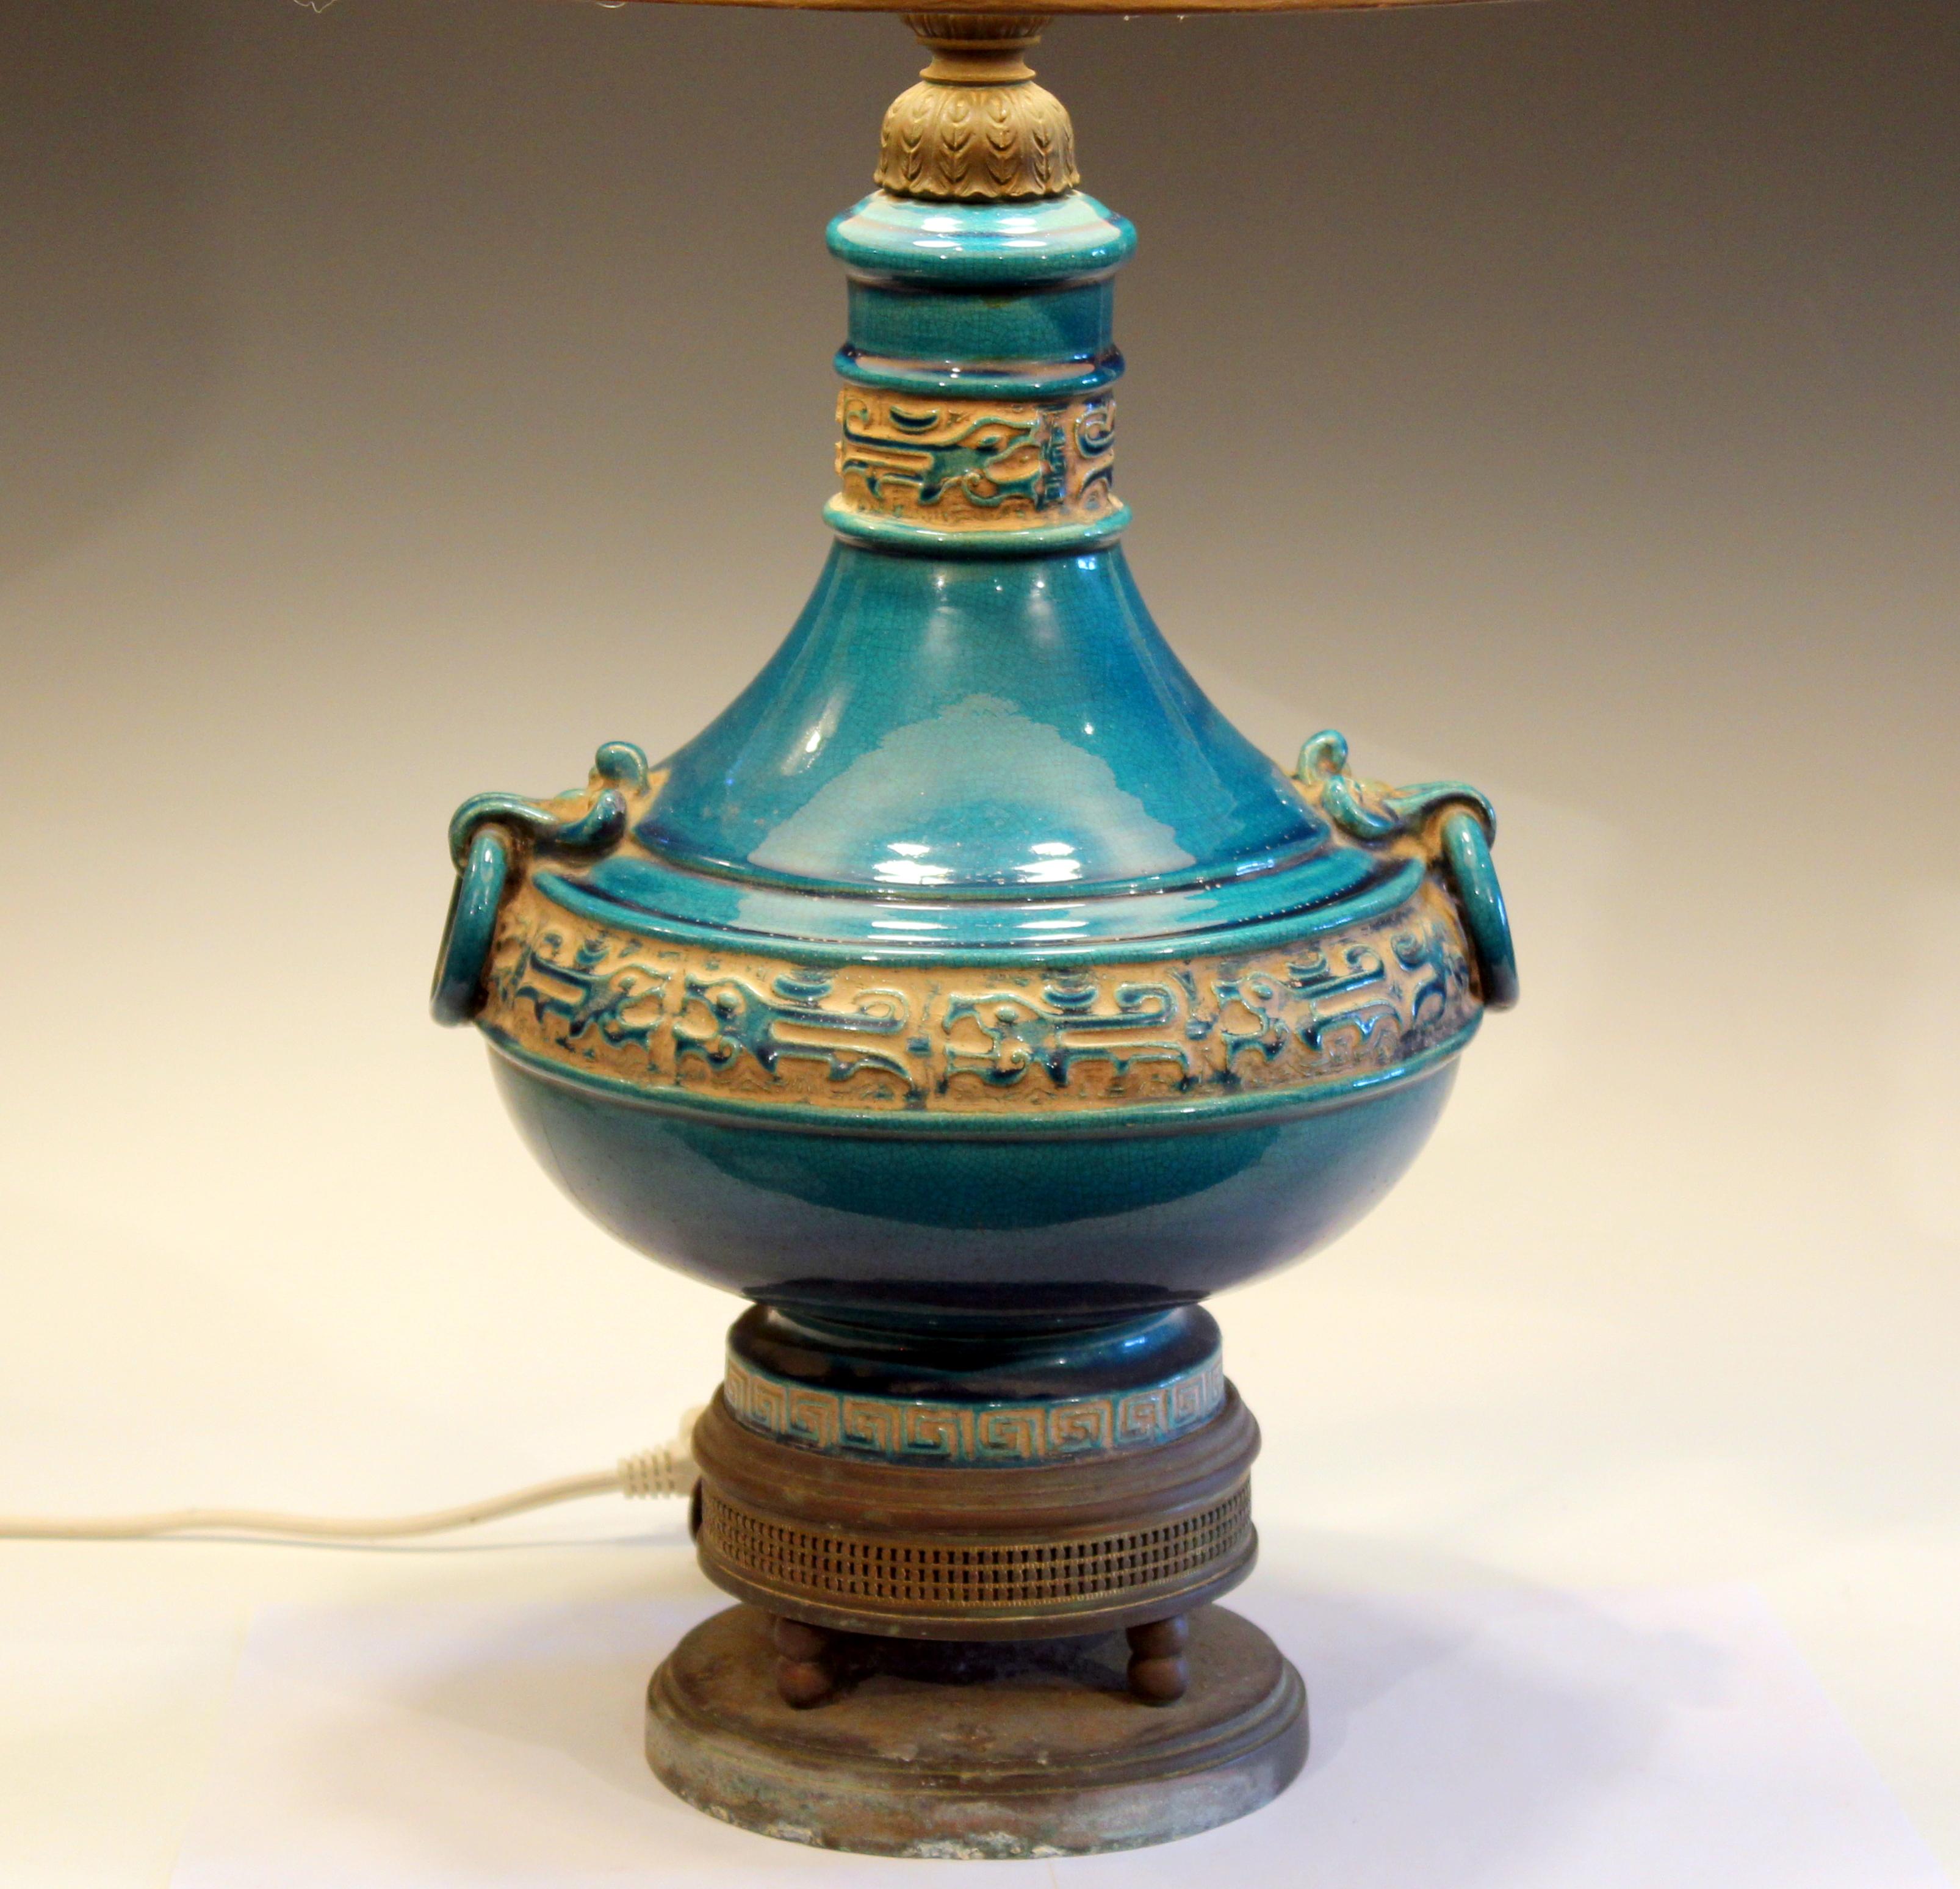 Zaccagnini pottery of Florence Italian lamp with ring handles and vibrant turquoise glaze, circa 1950s. Double socket cluster with new sockets. Corrosion to brass base, as shown. Measures: 28